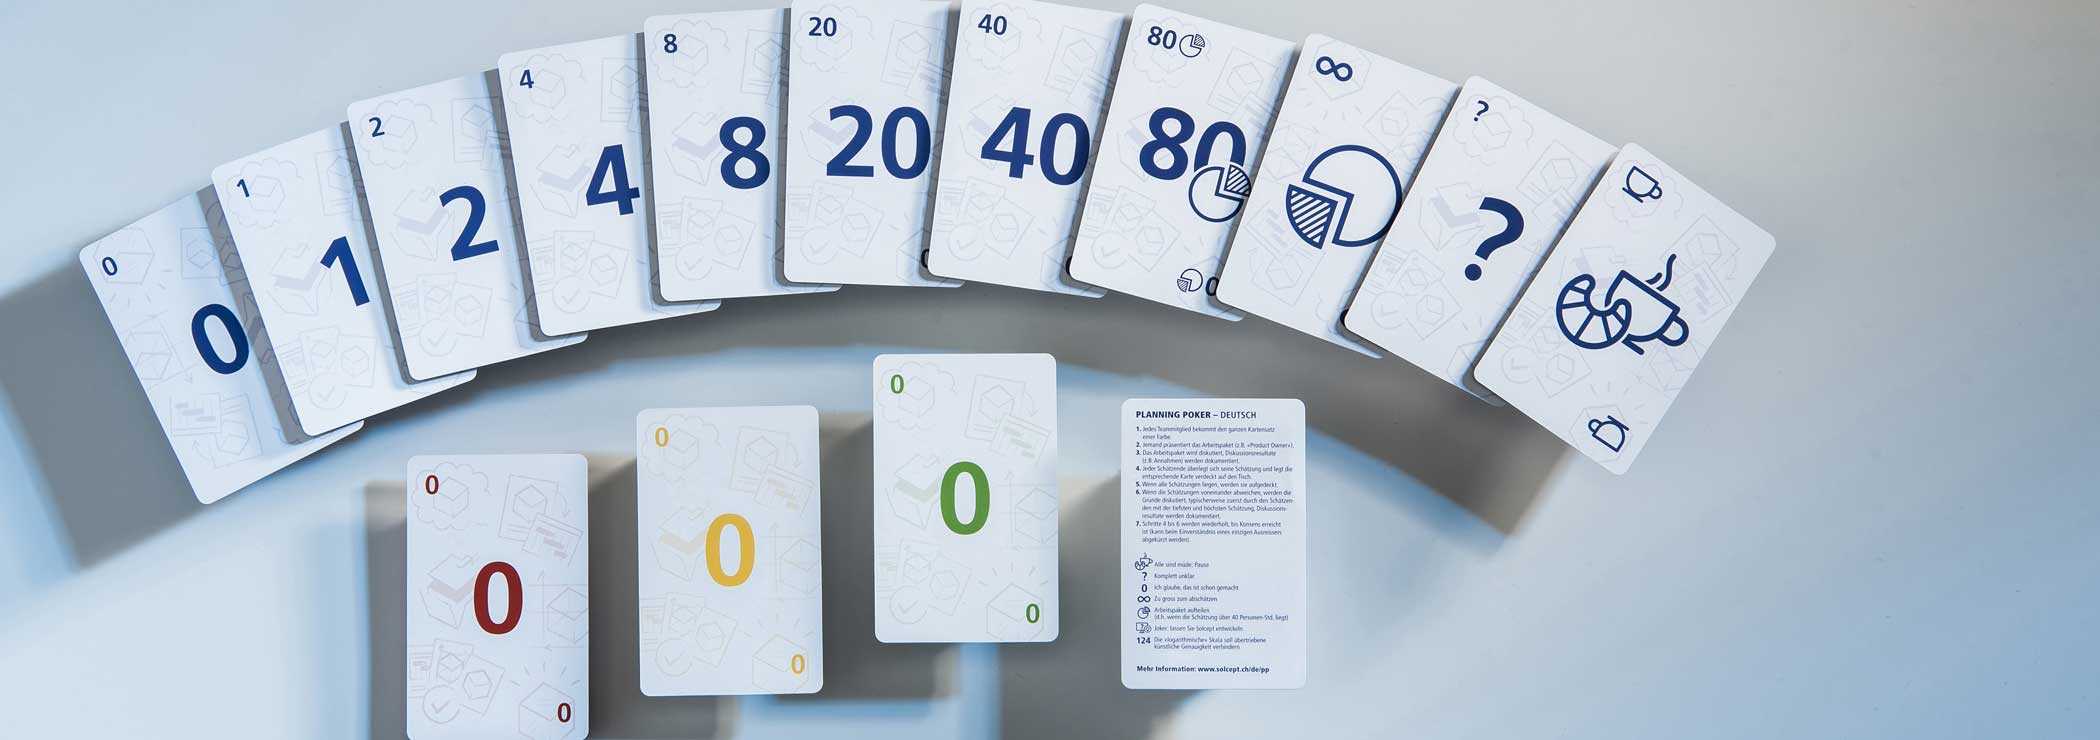 Instructions For Planning Poker With Planning Poker Cards Template